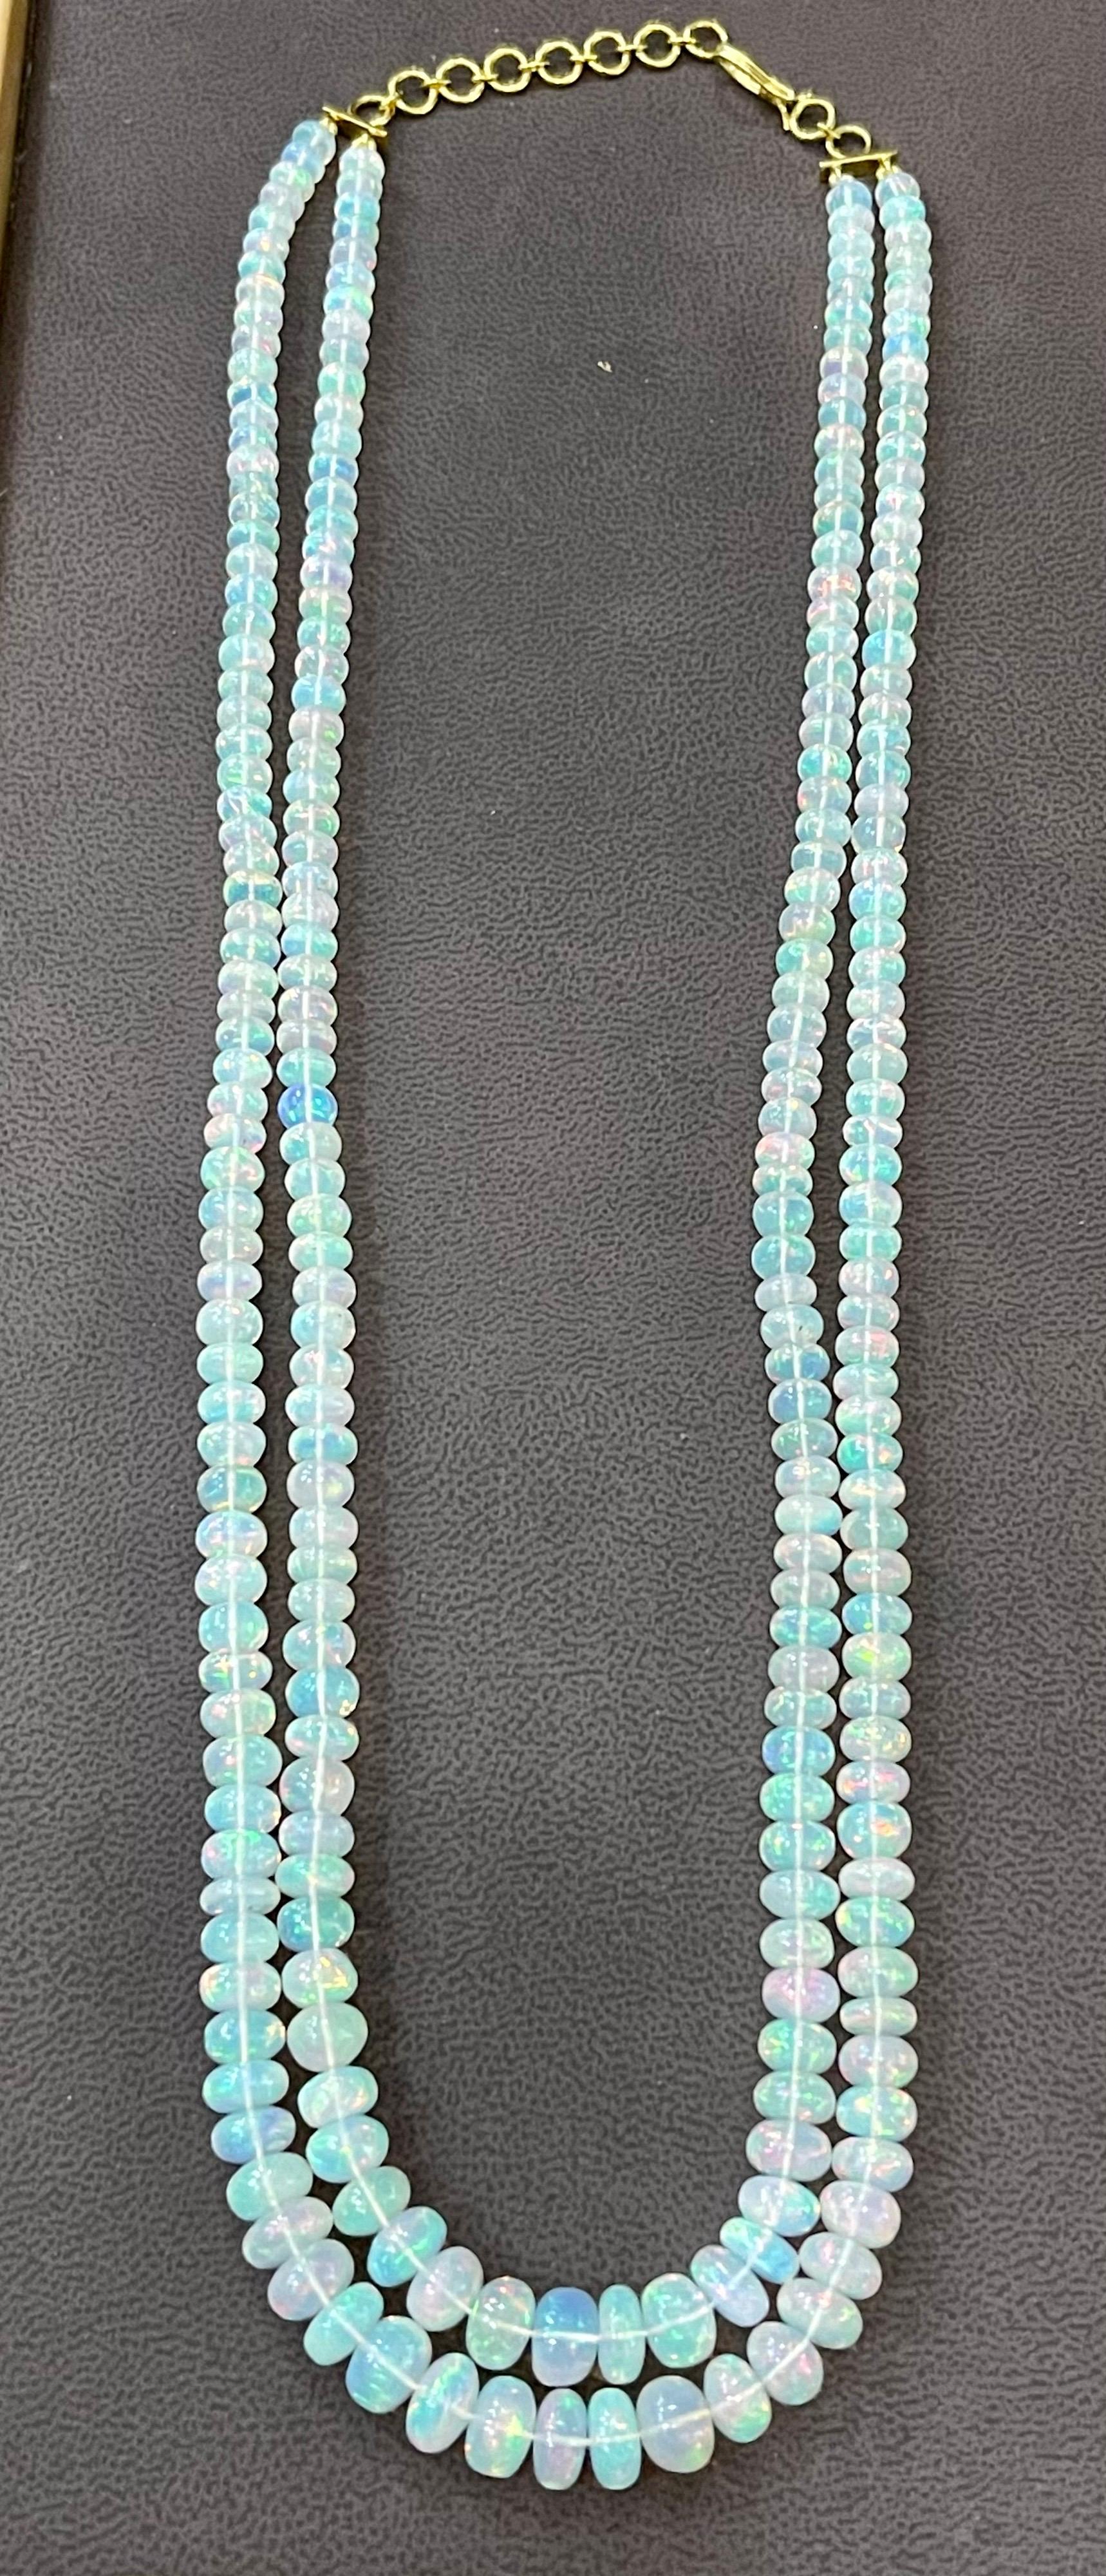 Natural 265 Ct Ethiopian Opal Bead Double Strand Necklace 14 Karat Yellow Gold 6